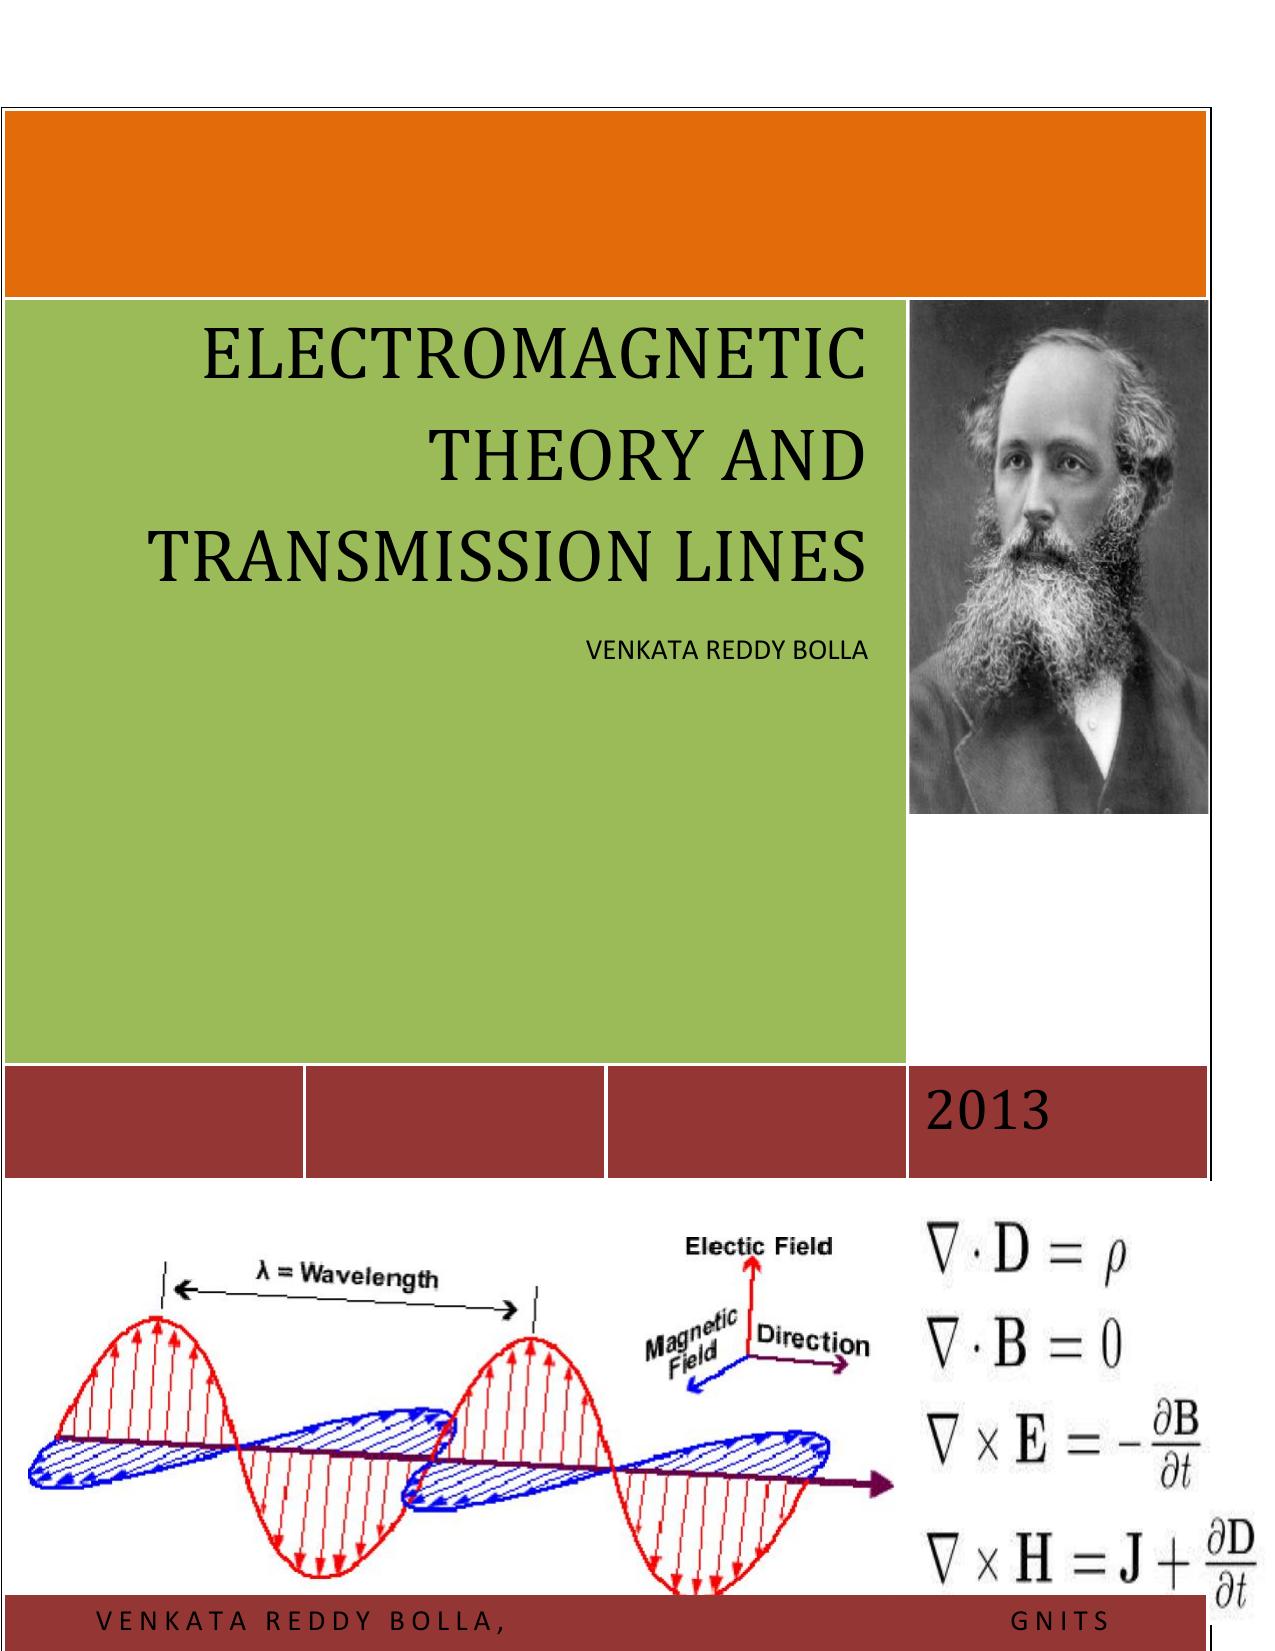 ELECTROMAGNETIC THEORY AND TRANSMISSION LINES